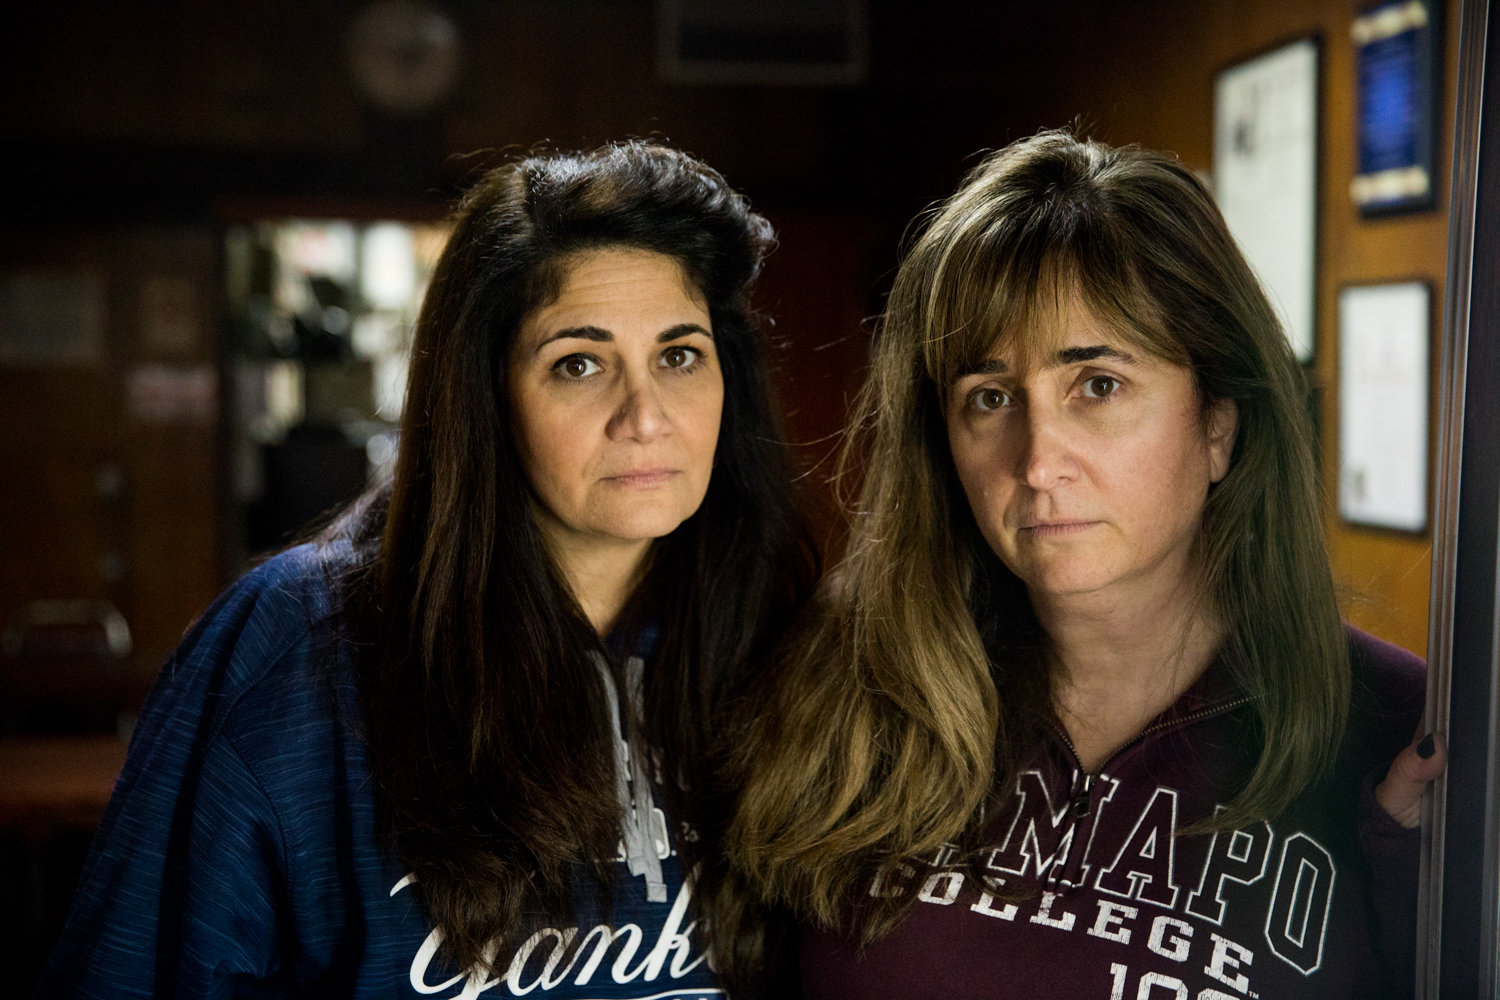 Sisters Lisa Loeser Weiss, left, and Pam Halpern are distraught over the closure of their father’s deli, Loeser’s Kosher Deli, after Con Edison found issues with its decades-old gas line installation. The cost of fixing the problem is upward of $100,000, and the deli is closed — possibly permanently.